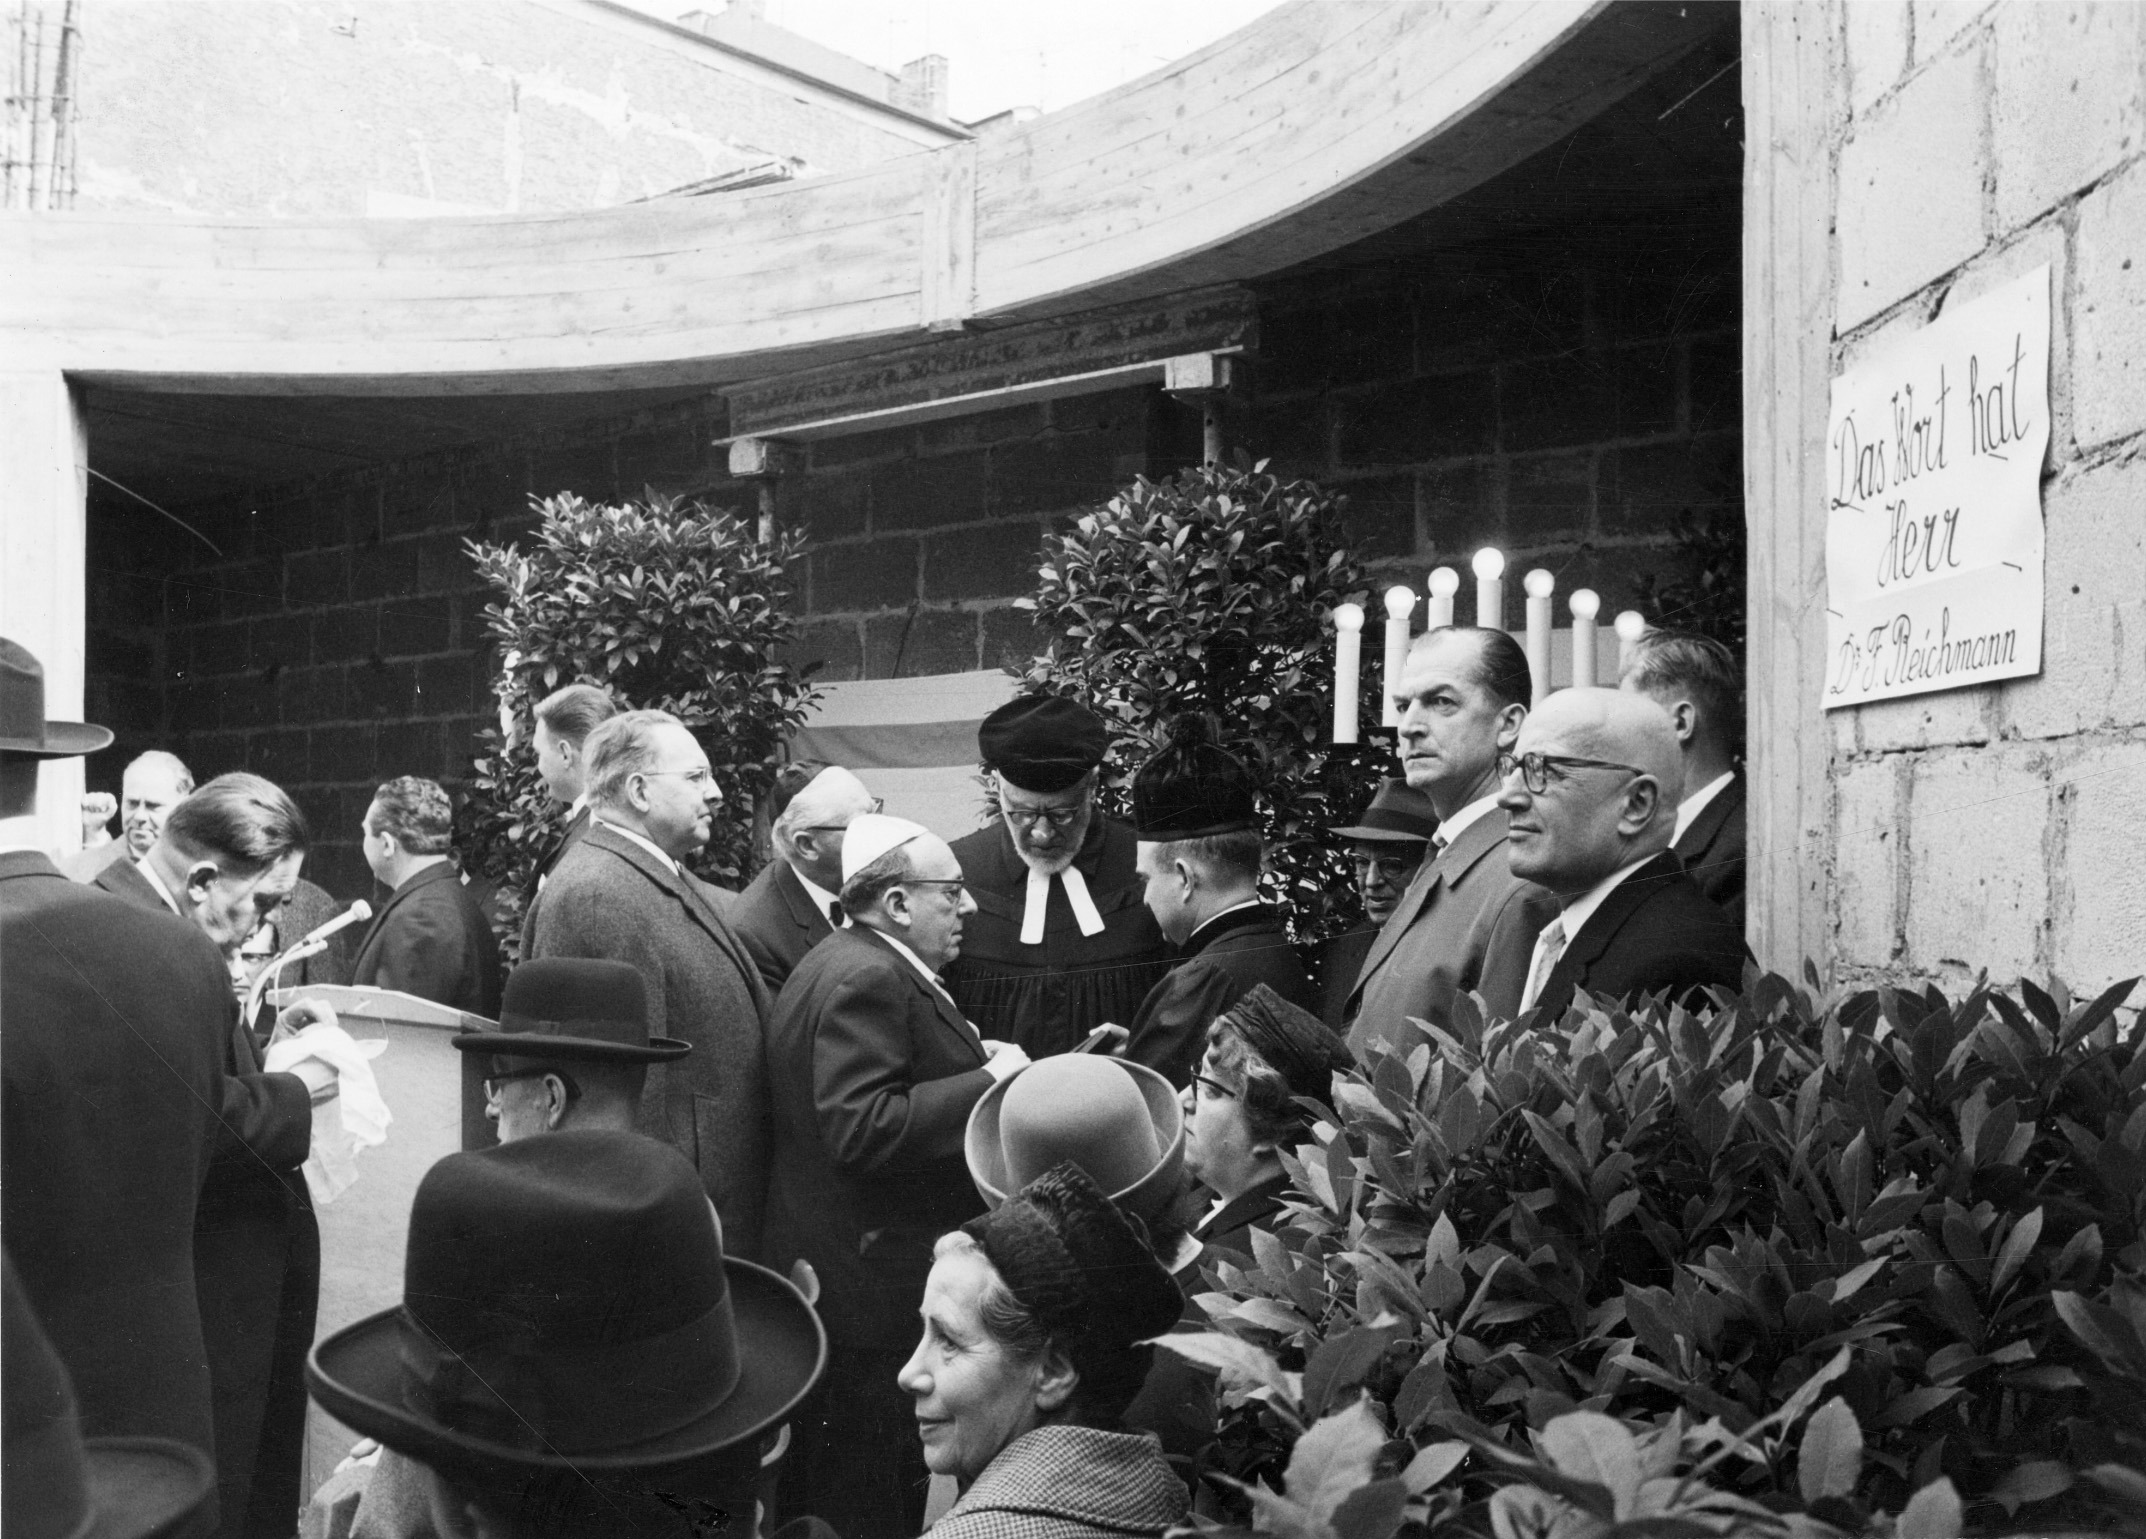 The laying of the cornerstone for the new synagogue building in 1965 took place in the shell of the building. StadtA WI, F000-255